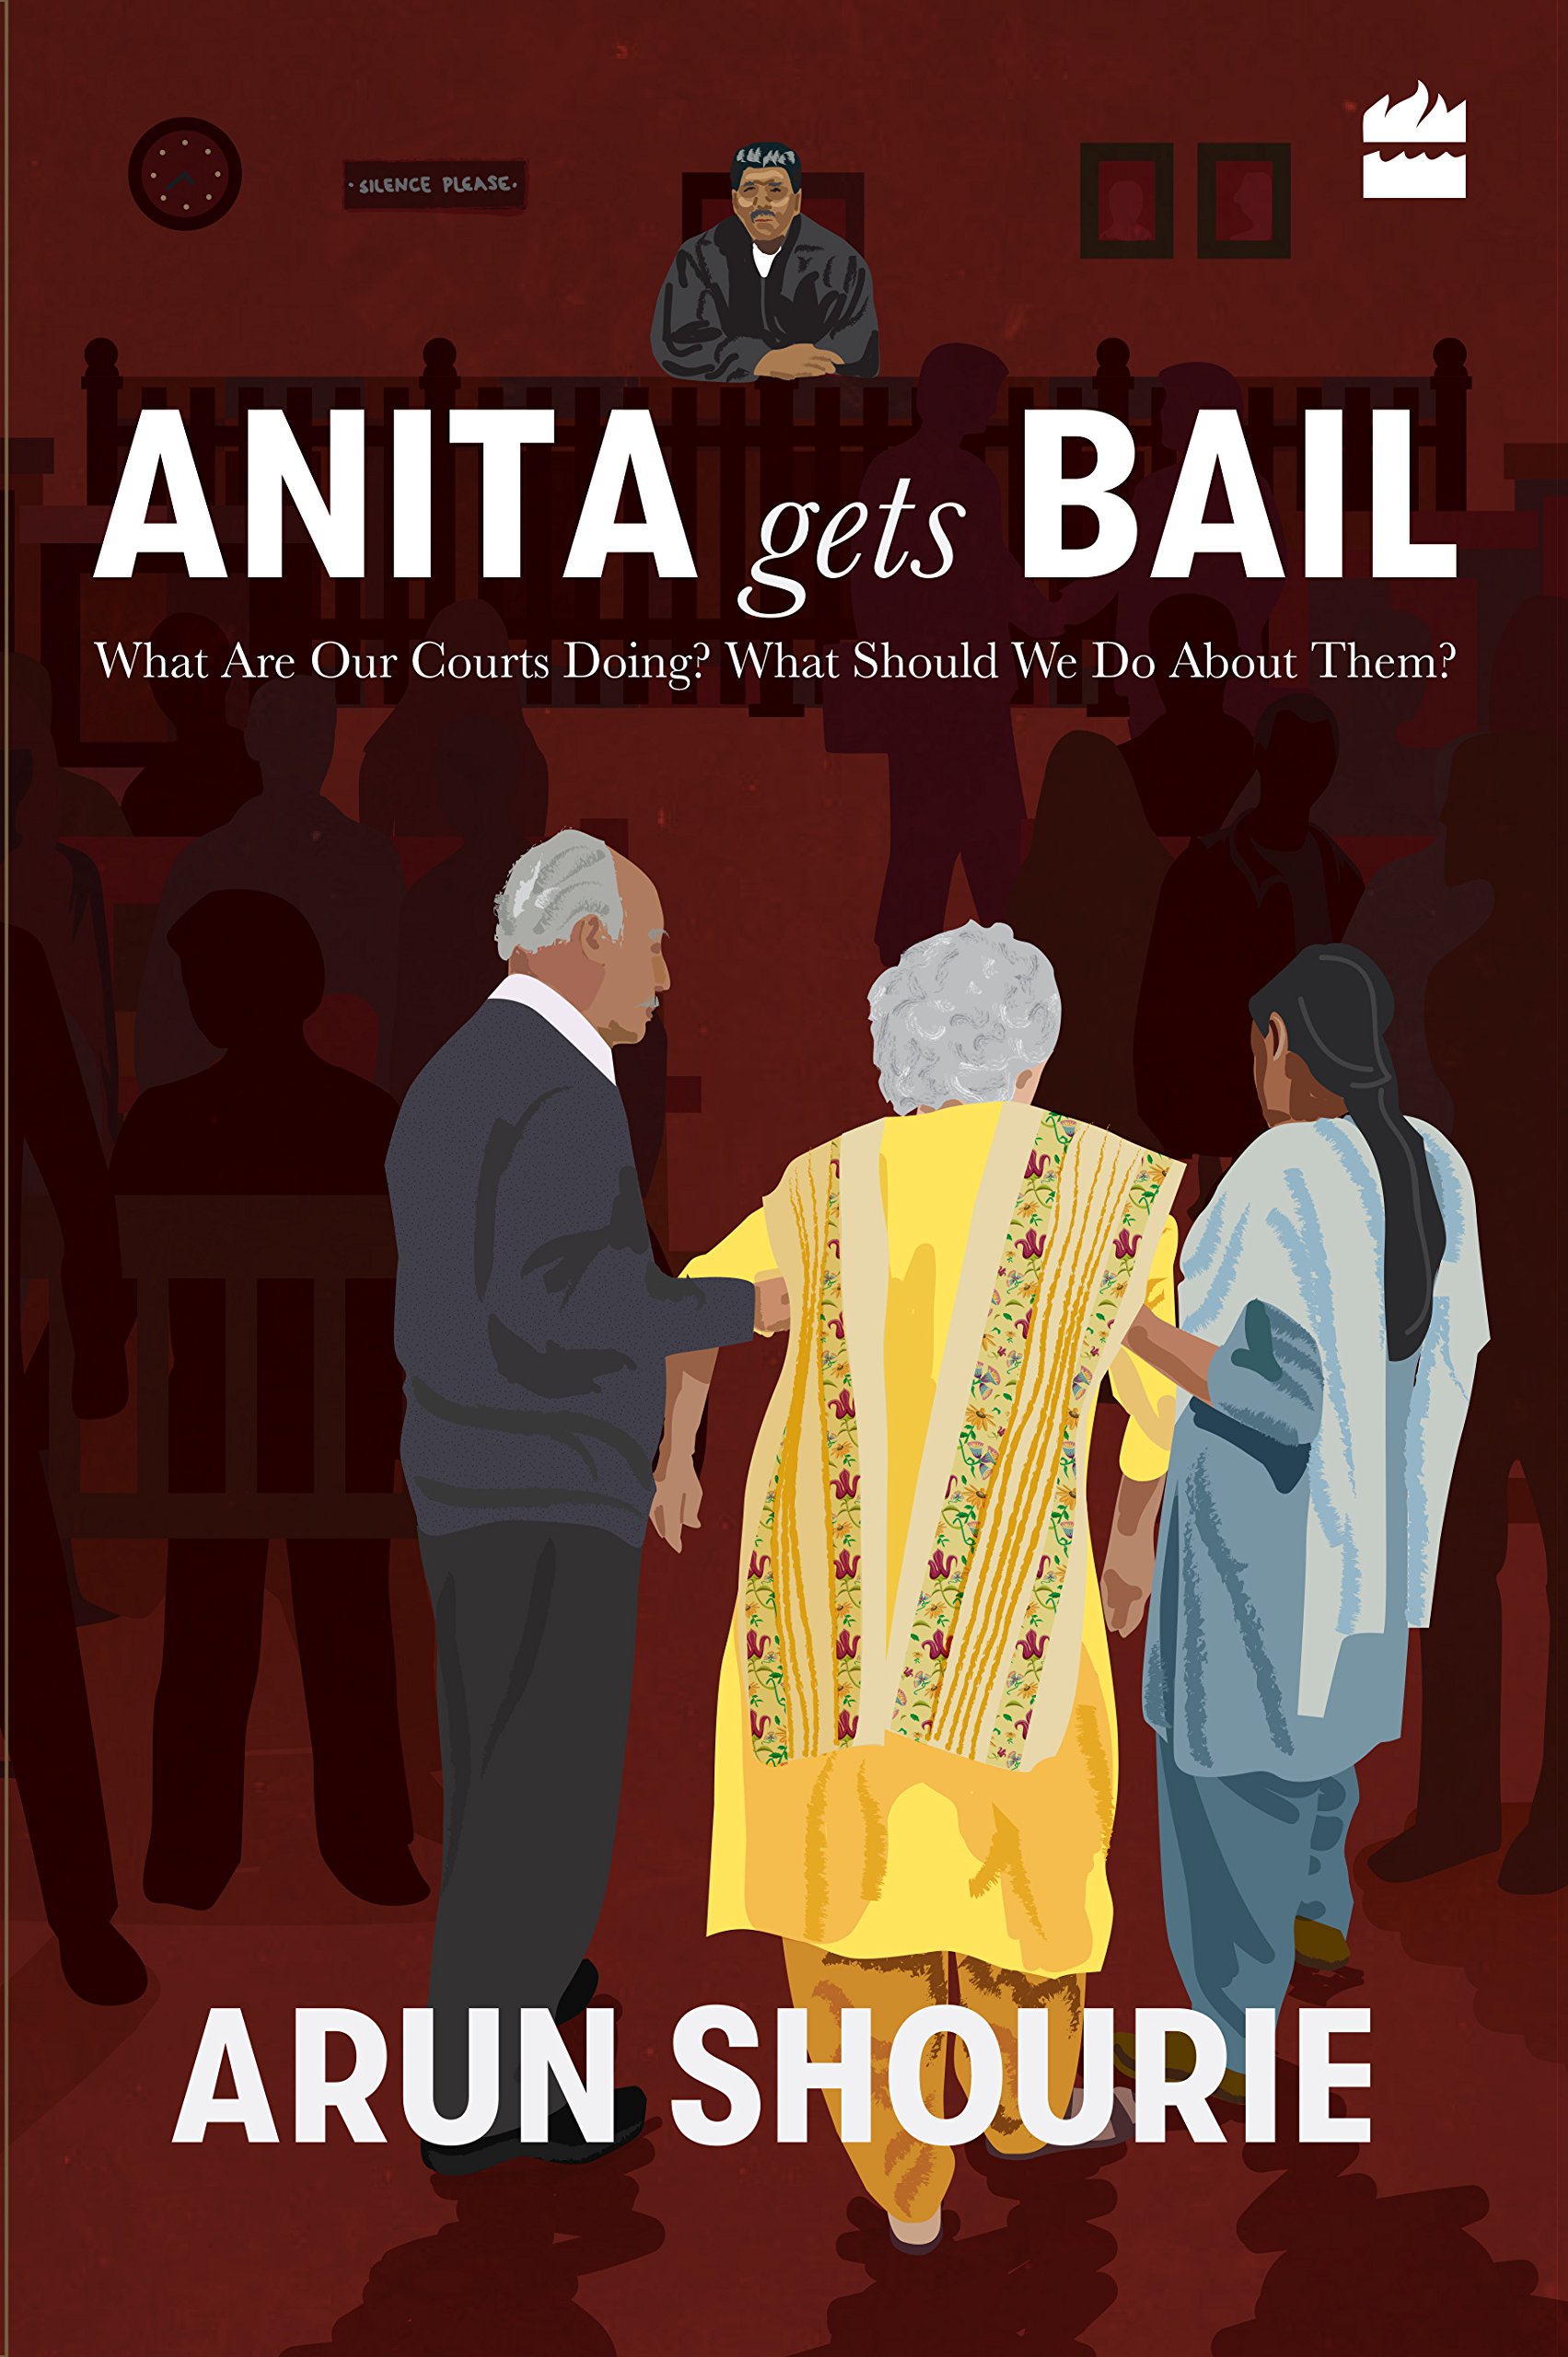 Anita gets bail: more on courts and their judgements